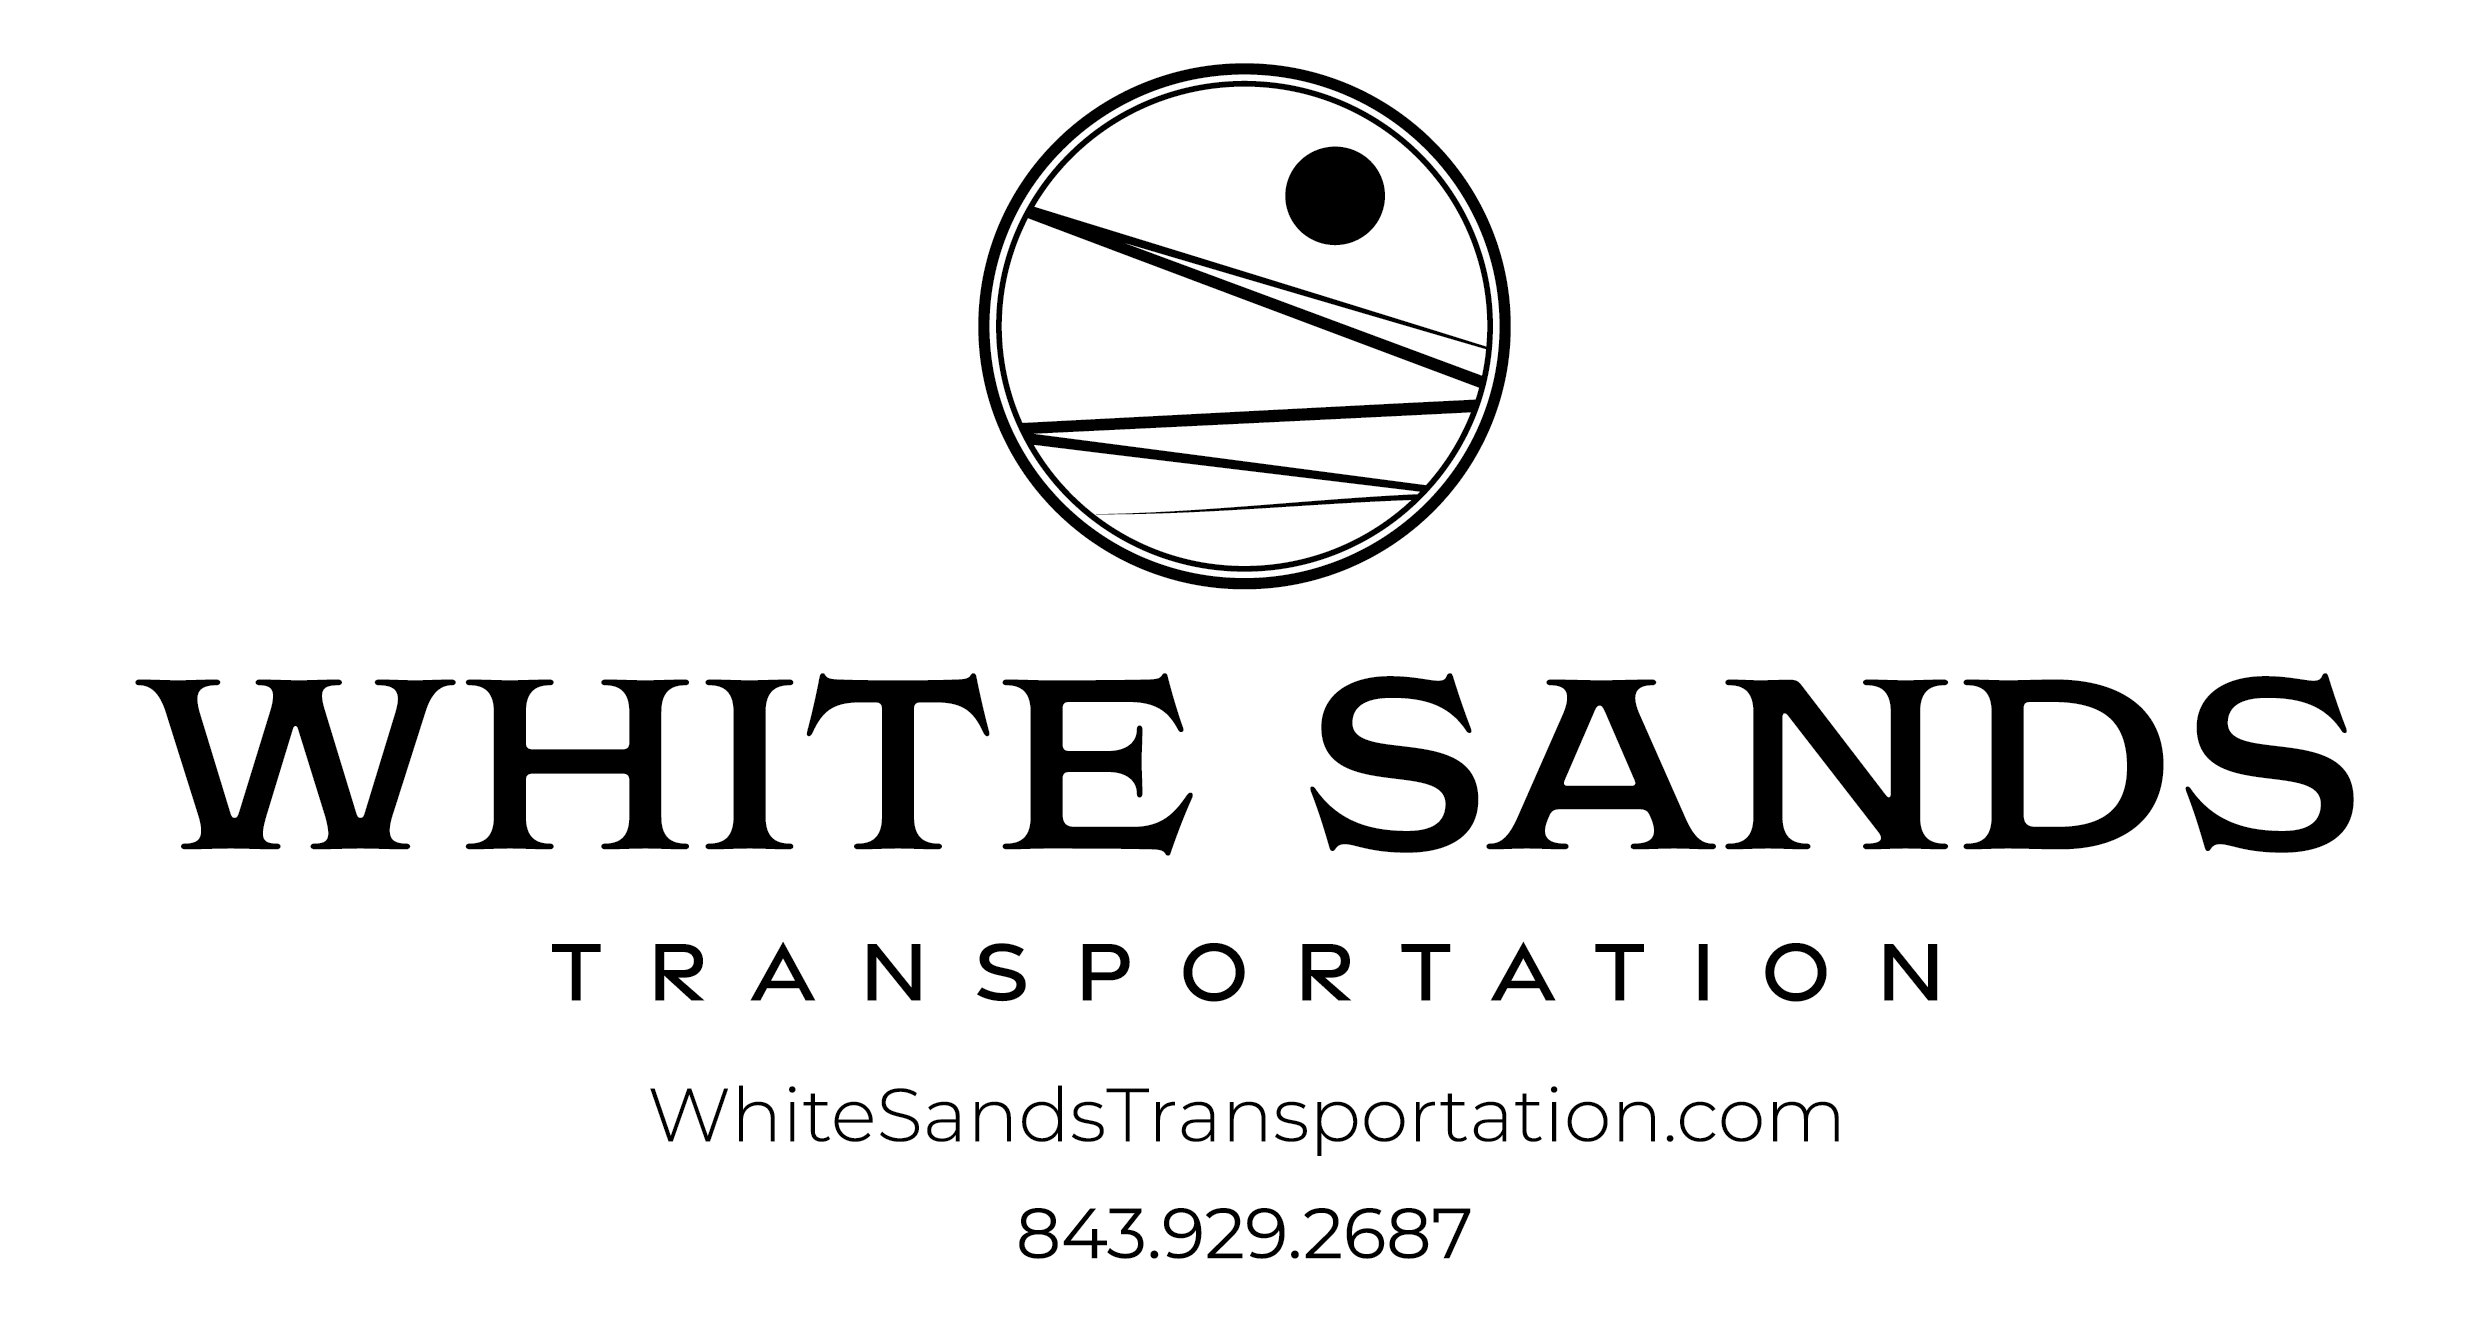 White Sands Transportation luxury car service. VIP chauffeured vehicles for Hilton Head, Savannah, Bluffton, Beaufort and beyond. We offer SUV's, sedans, passenger vans, party buses, and more. Airport transportation, wedding transportation, group transportation are just some of the services for people traveling in and out of the low country. Call today to inquire about airport shuttles or group transfers.